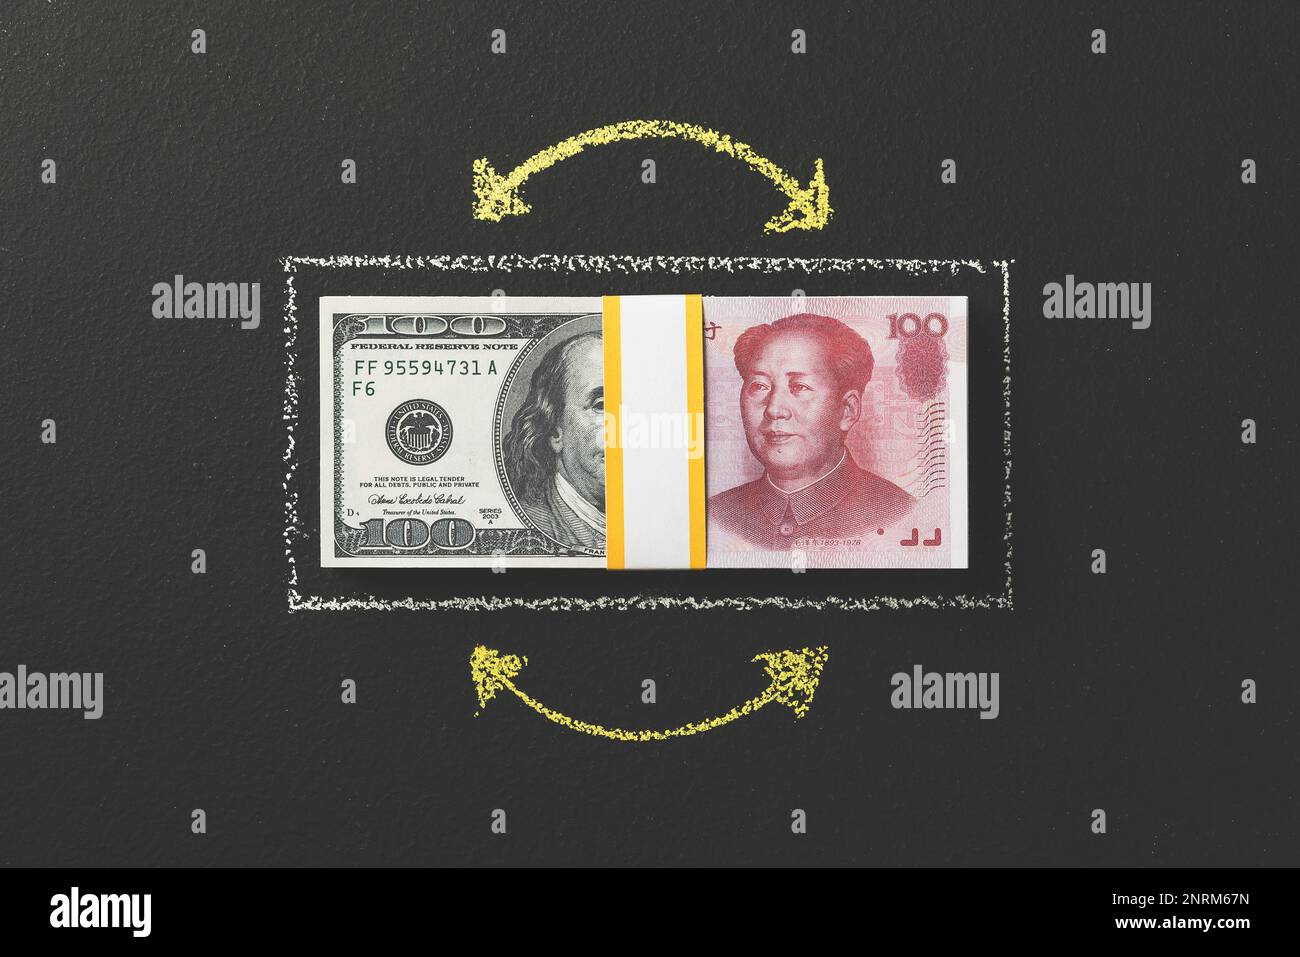 International stock exchange currency, Dollar to Chinese yuan. Currency convertion, exchange rates, foreign exchange market. Stock Photo